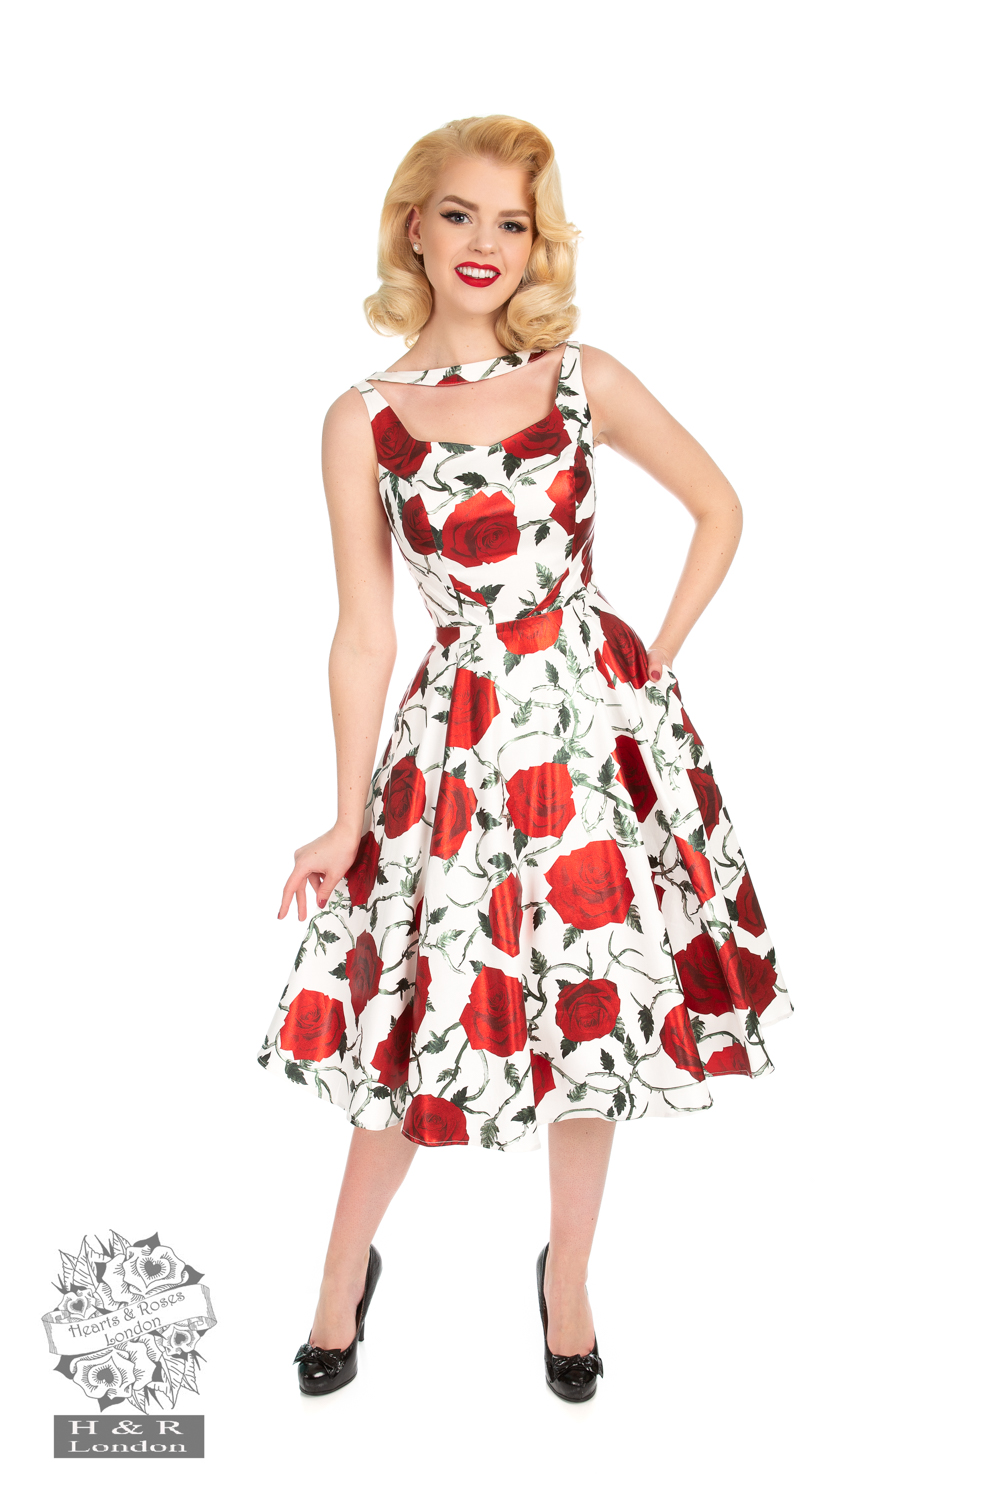 Hearts-Roses-White-Metalic-Red-Rose-Dress